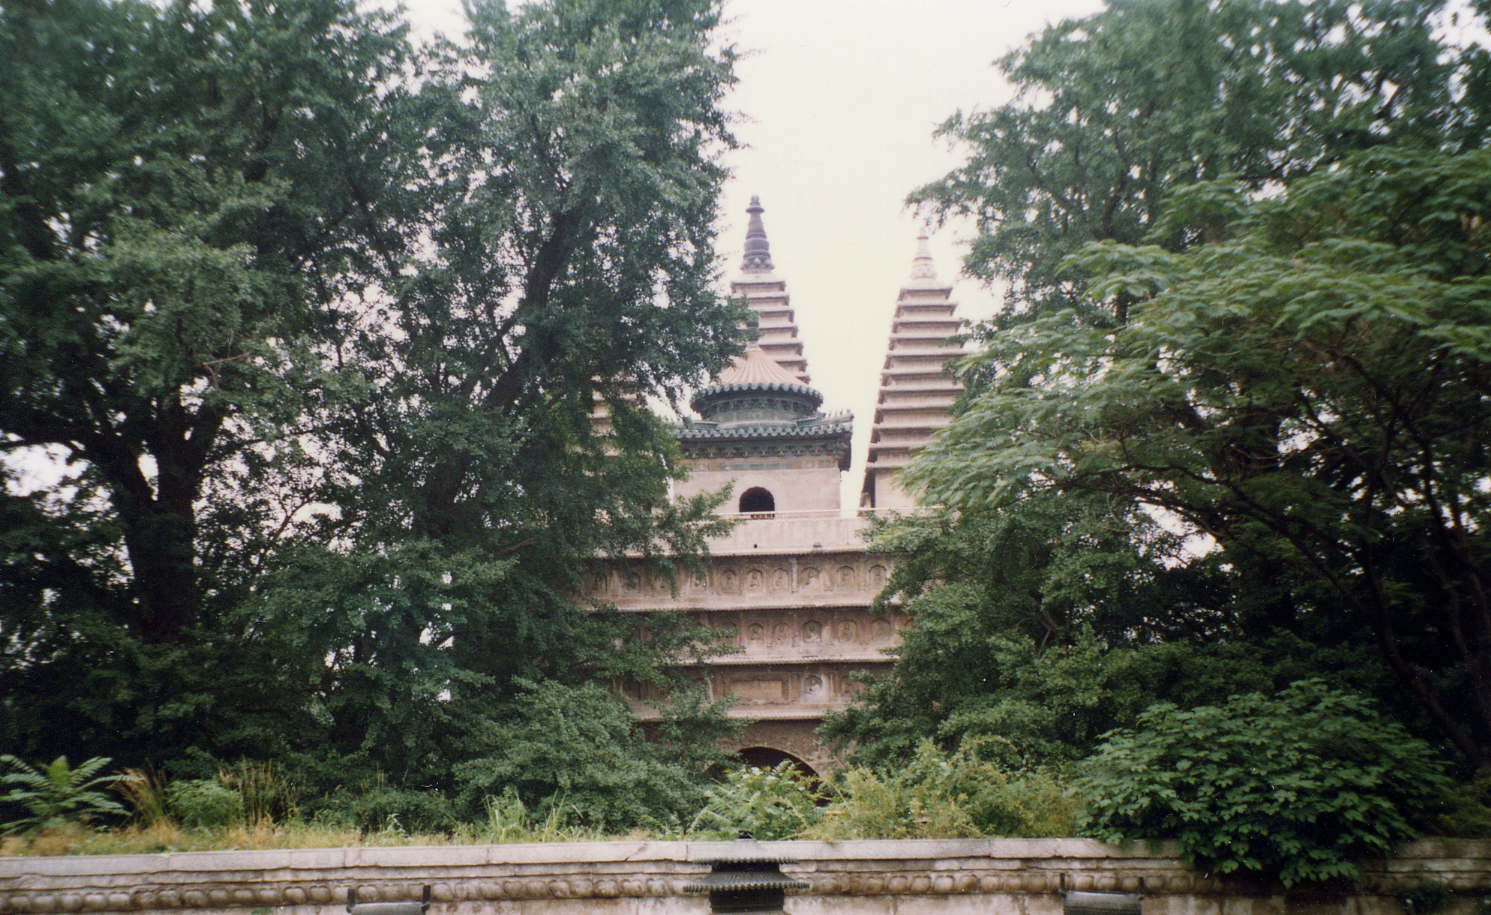 View through trees of building featuring three tapered towers and smaller central tower with conical roof